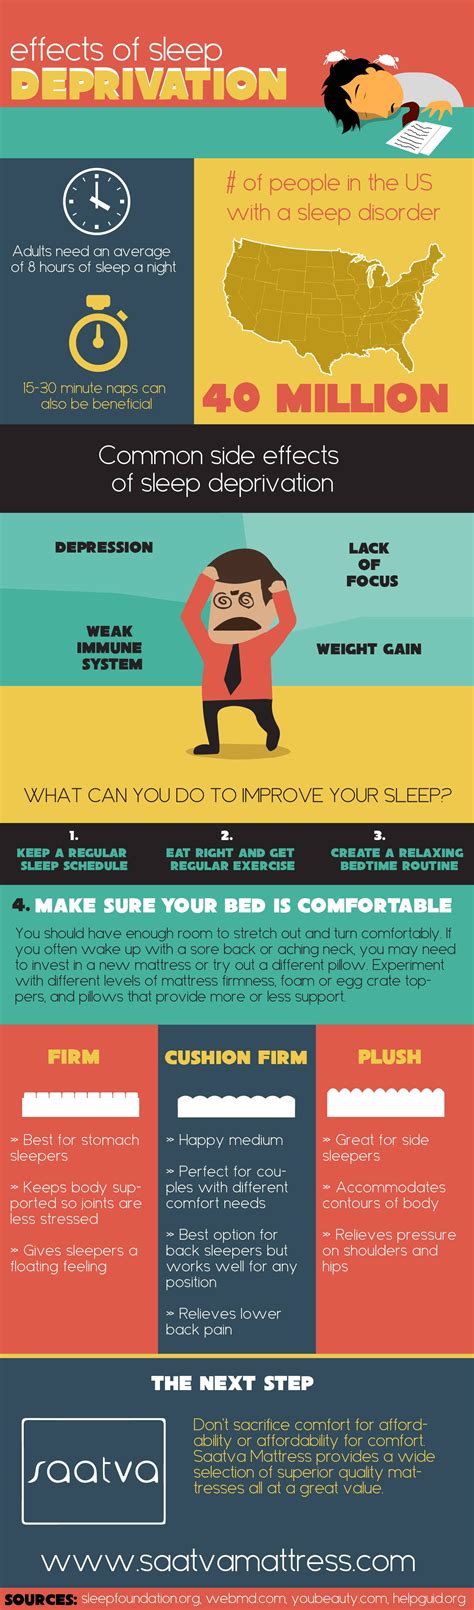 Effects Of Sleep Deprivation Infographic ~ Visualistan